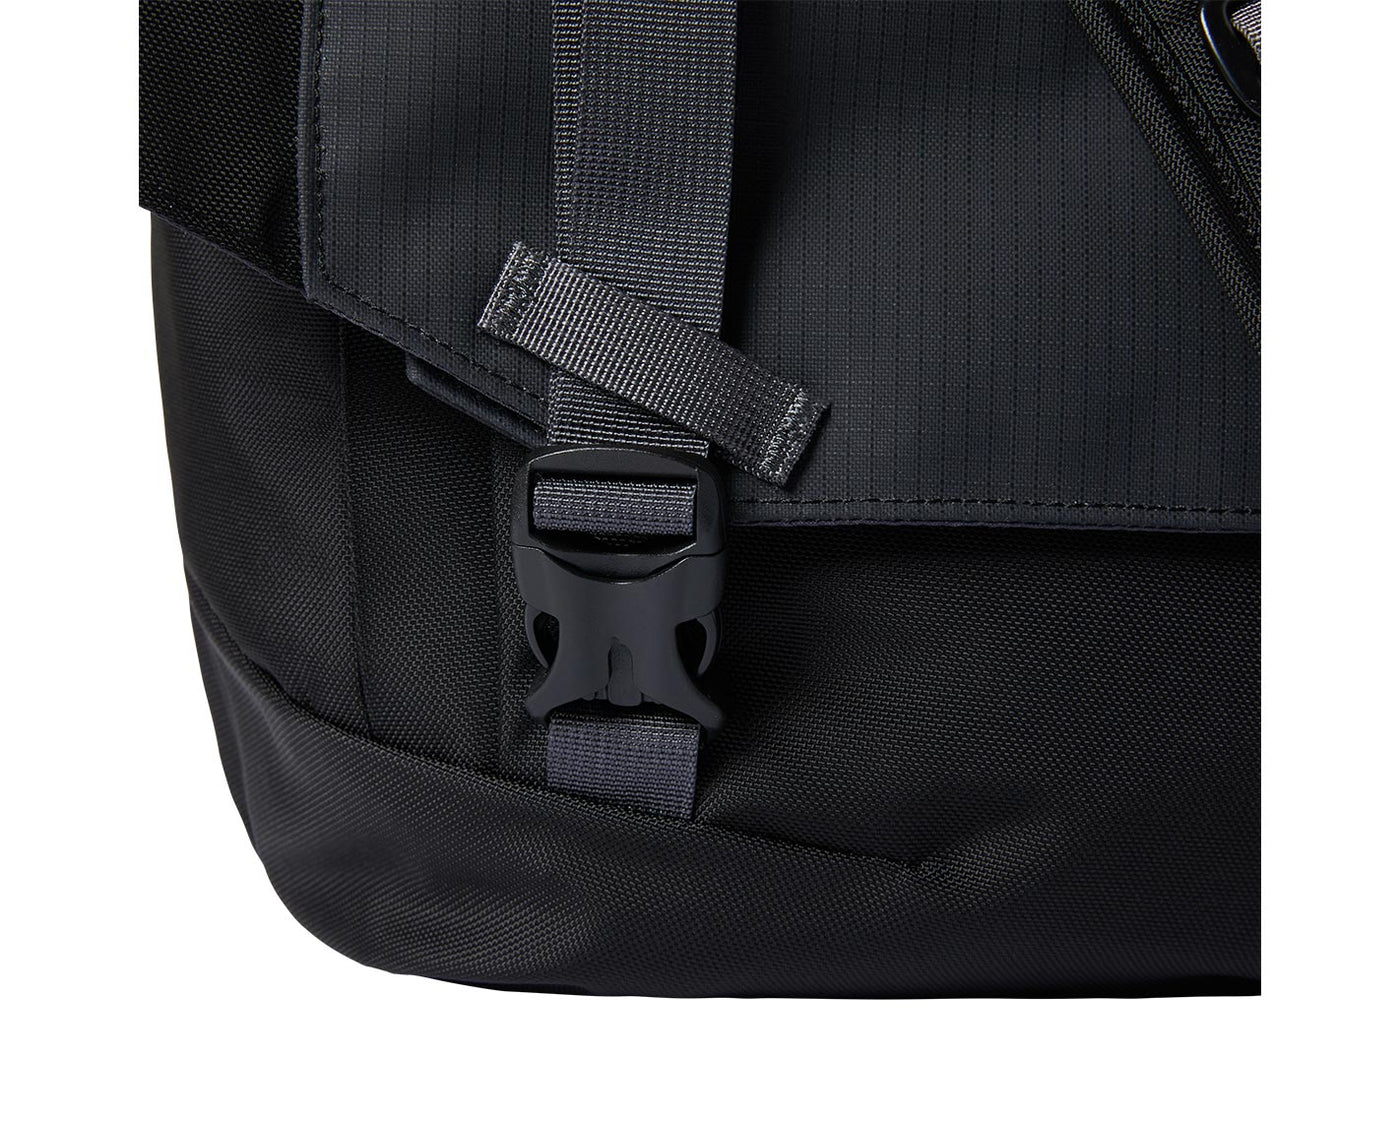 Urban Messenger Bag, promotional gear for business and events, buckle detail